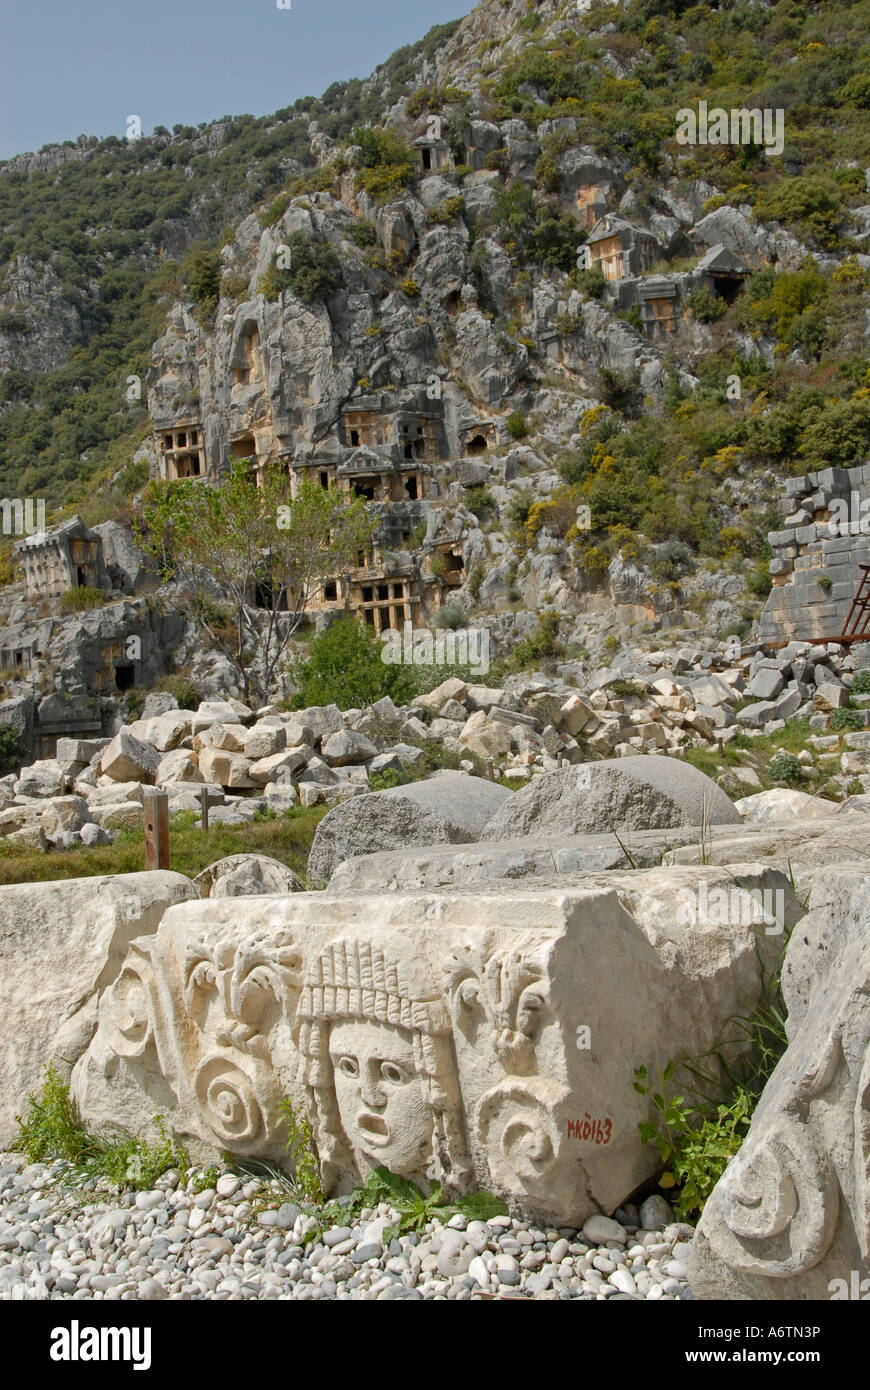 Ruins in the ancient Greek town of Myra in Lycia where the town of Kale or Demre is today, located in Antalya Province of Turkey Stock Photo